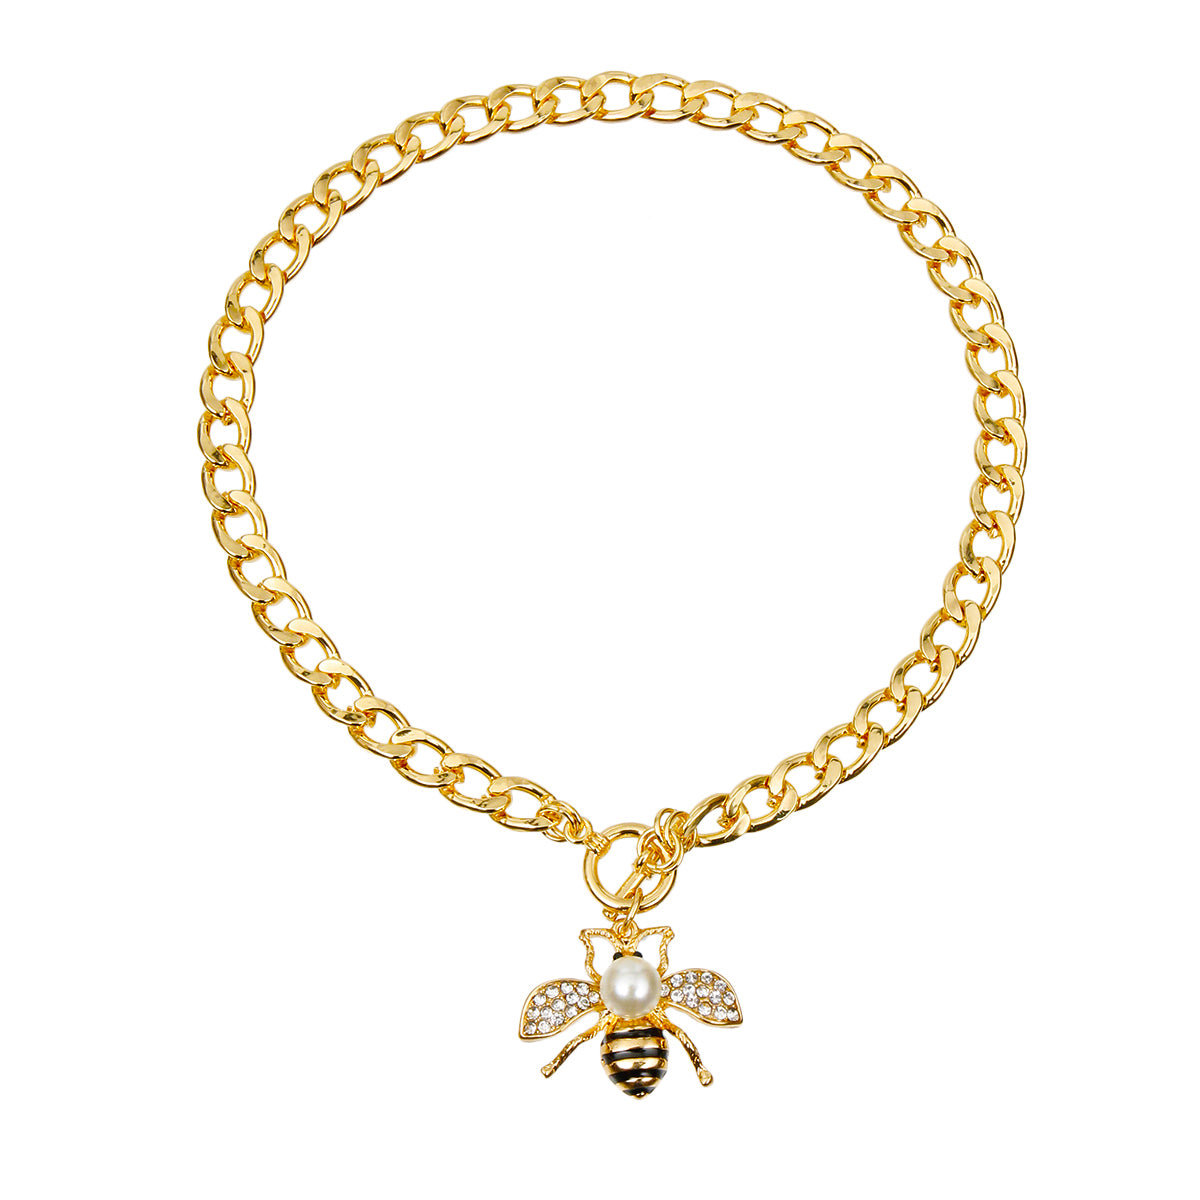 Designer Style Rhinestone Bee Toggle Necklace with Pearl Detail